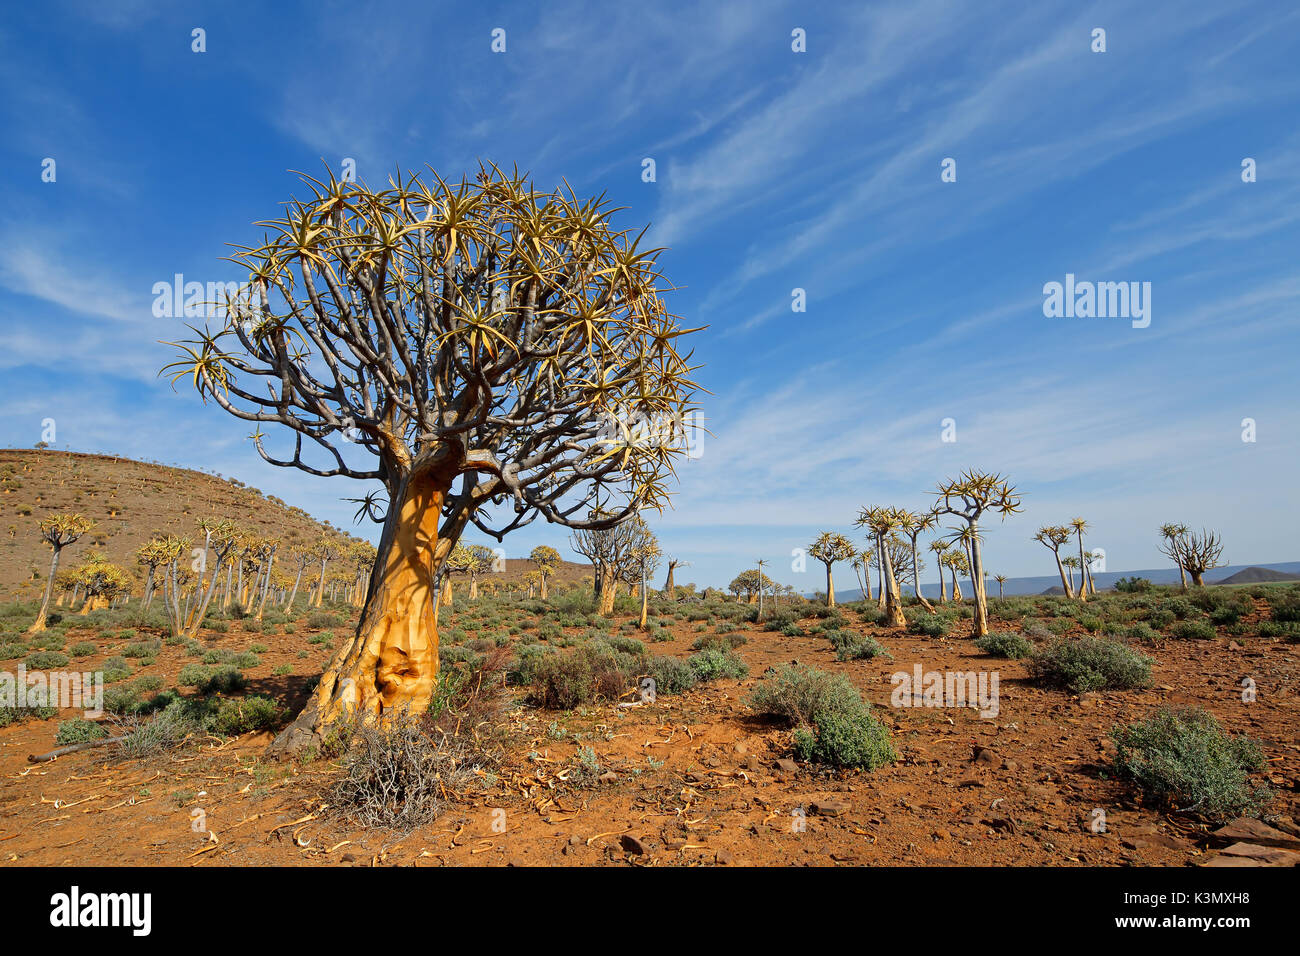 Desert landscape with with quiver trees (Aloe dichotoma), Northern Cape, South Africa Stock Photo